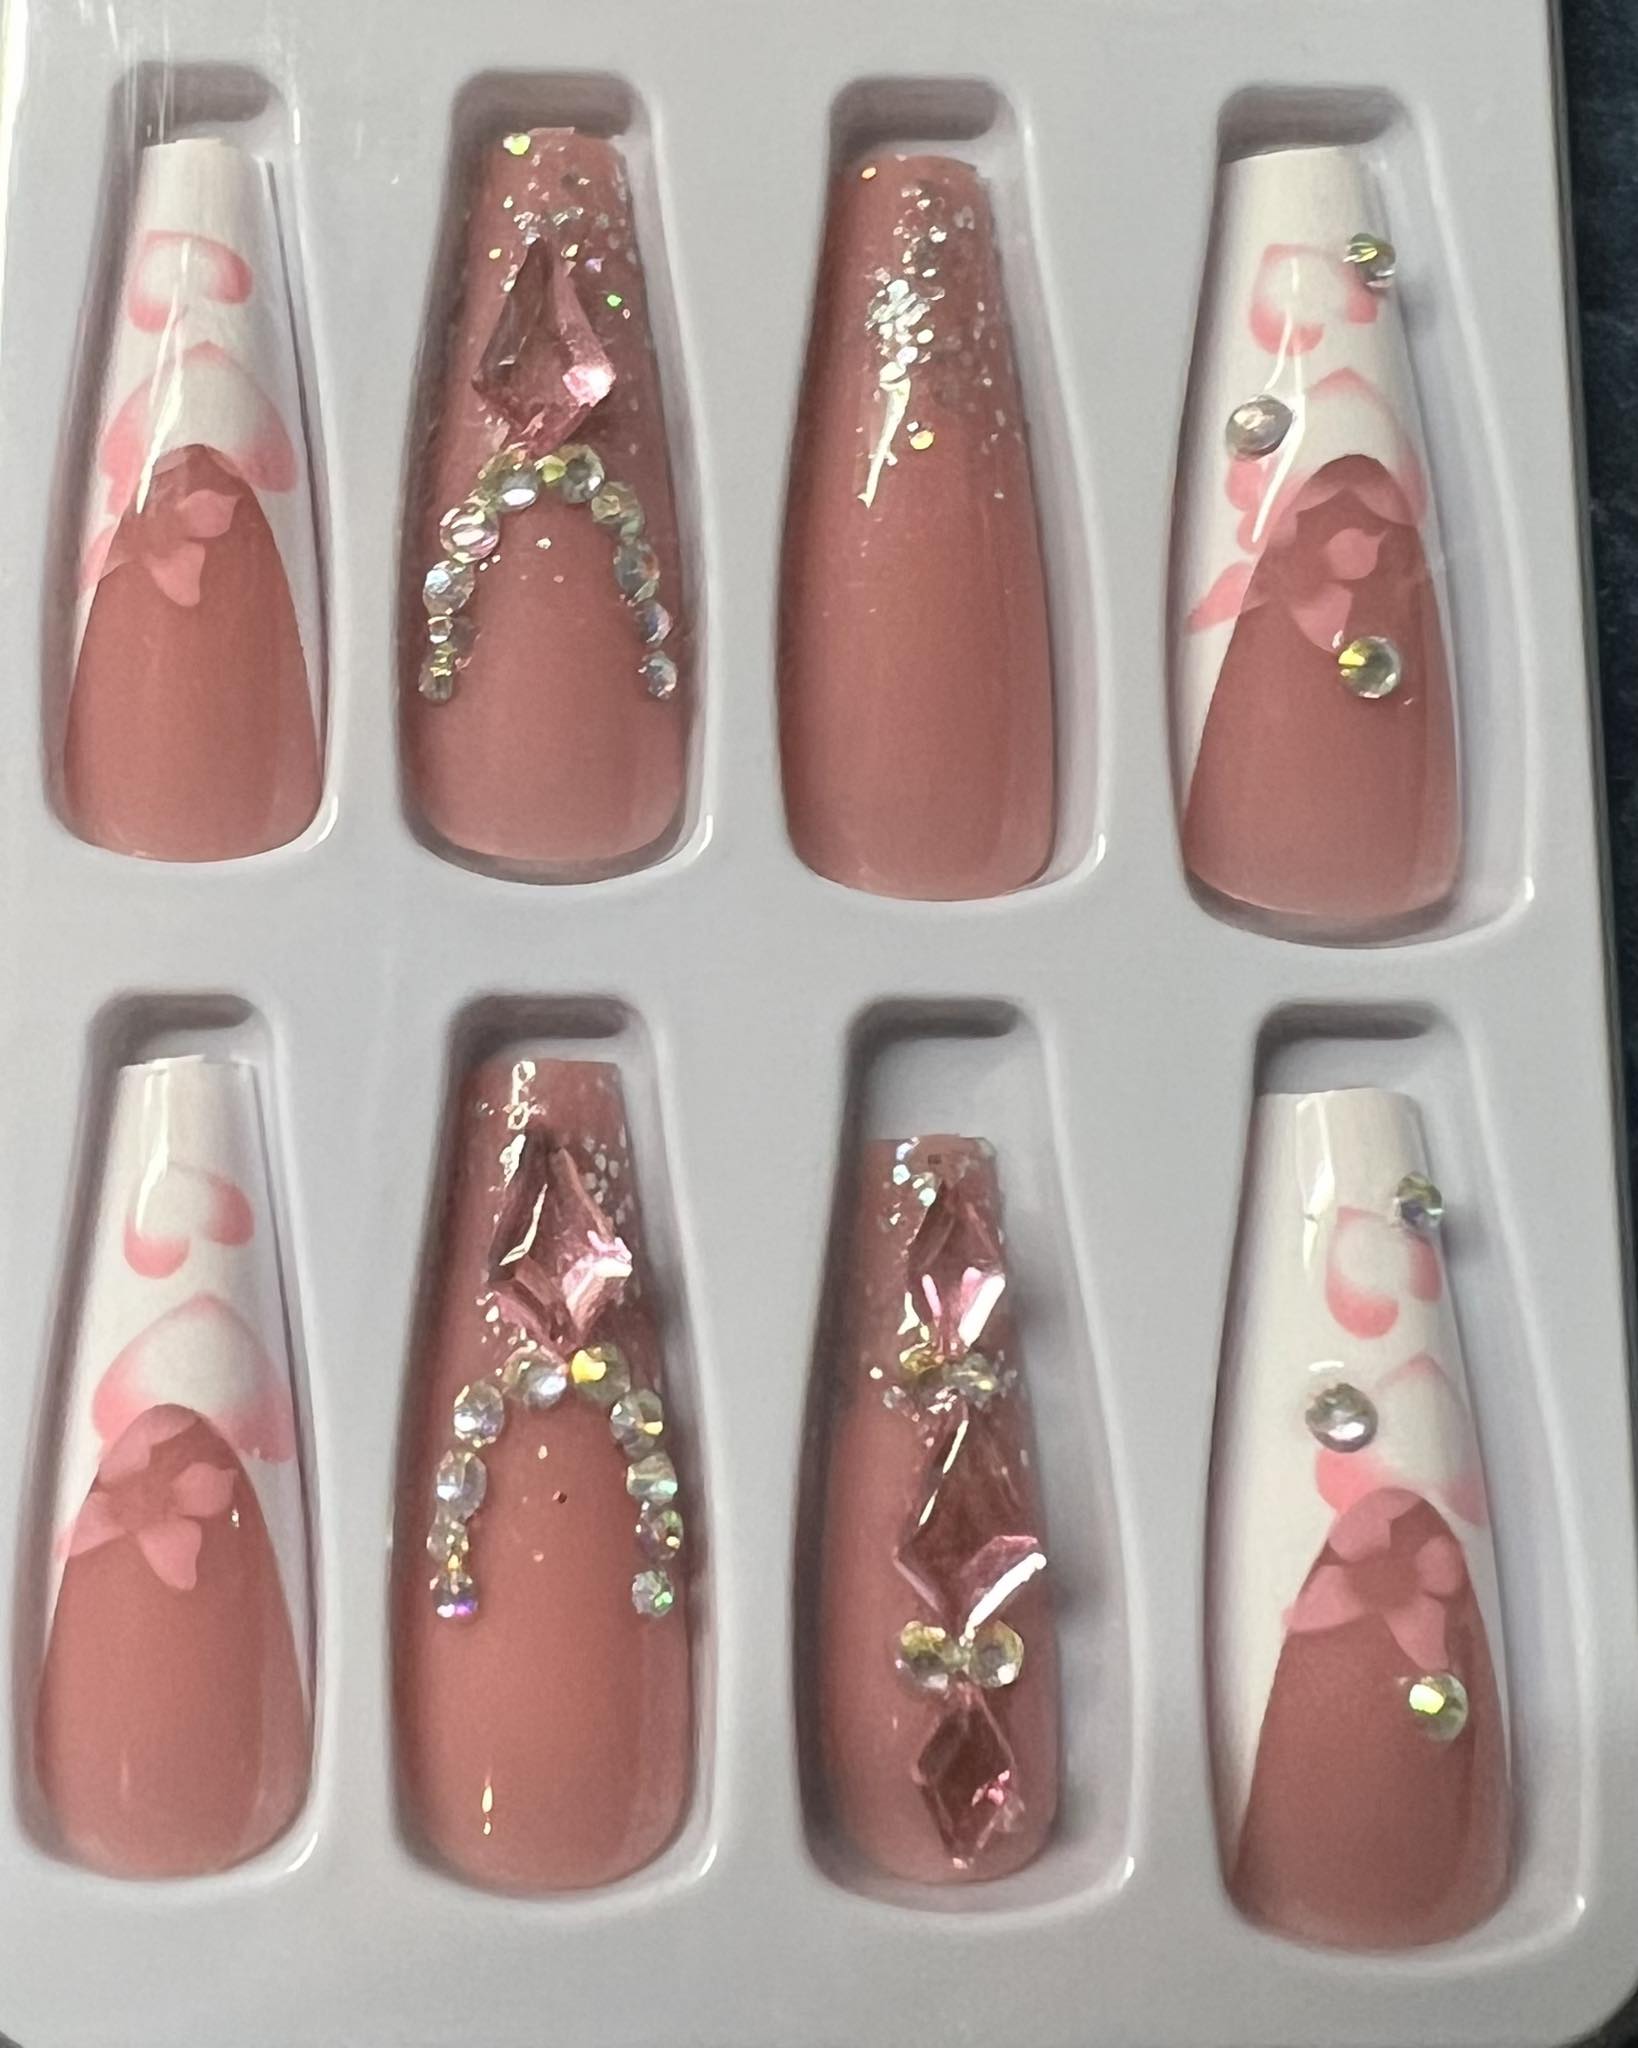 Long Coffin Press on Nails. White Tips with Pink Hearts & Butterflies & Clear with Jewels. Easy and quick to apply. Great for those special occasions, parties or add an edge to any outfit. Gorgeous, flattering and you can re-use them again and again.